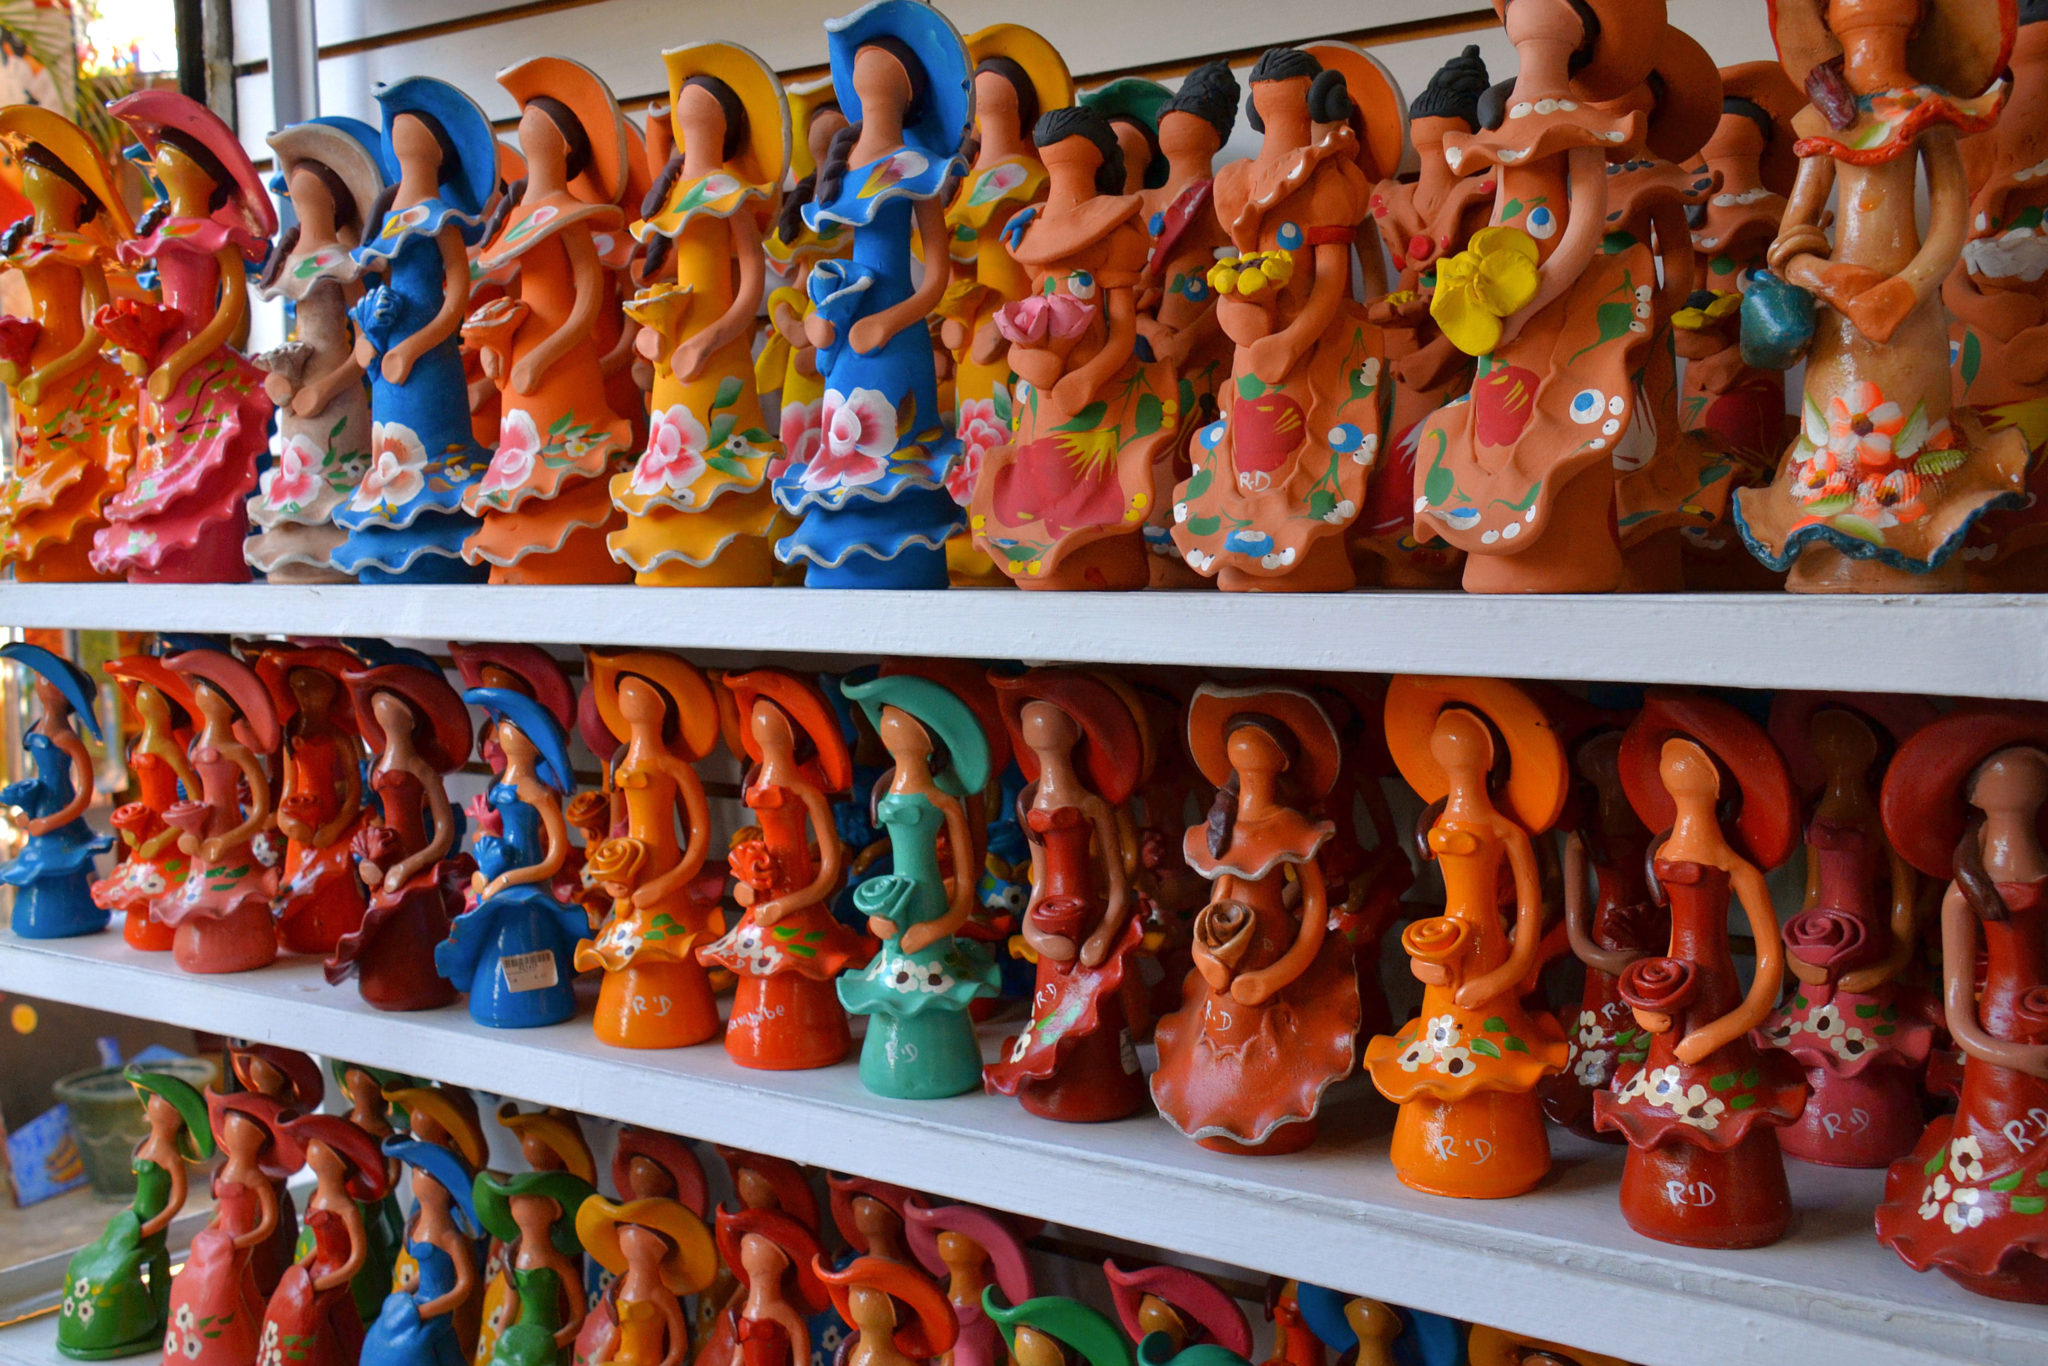 Clay figurines from the Dominican Republic